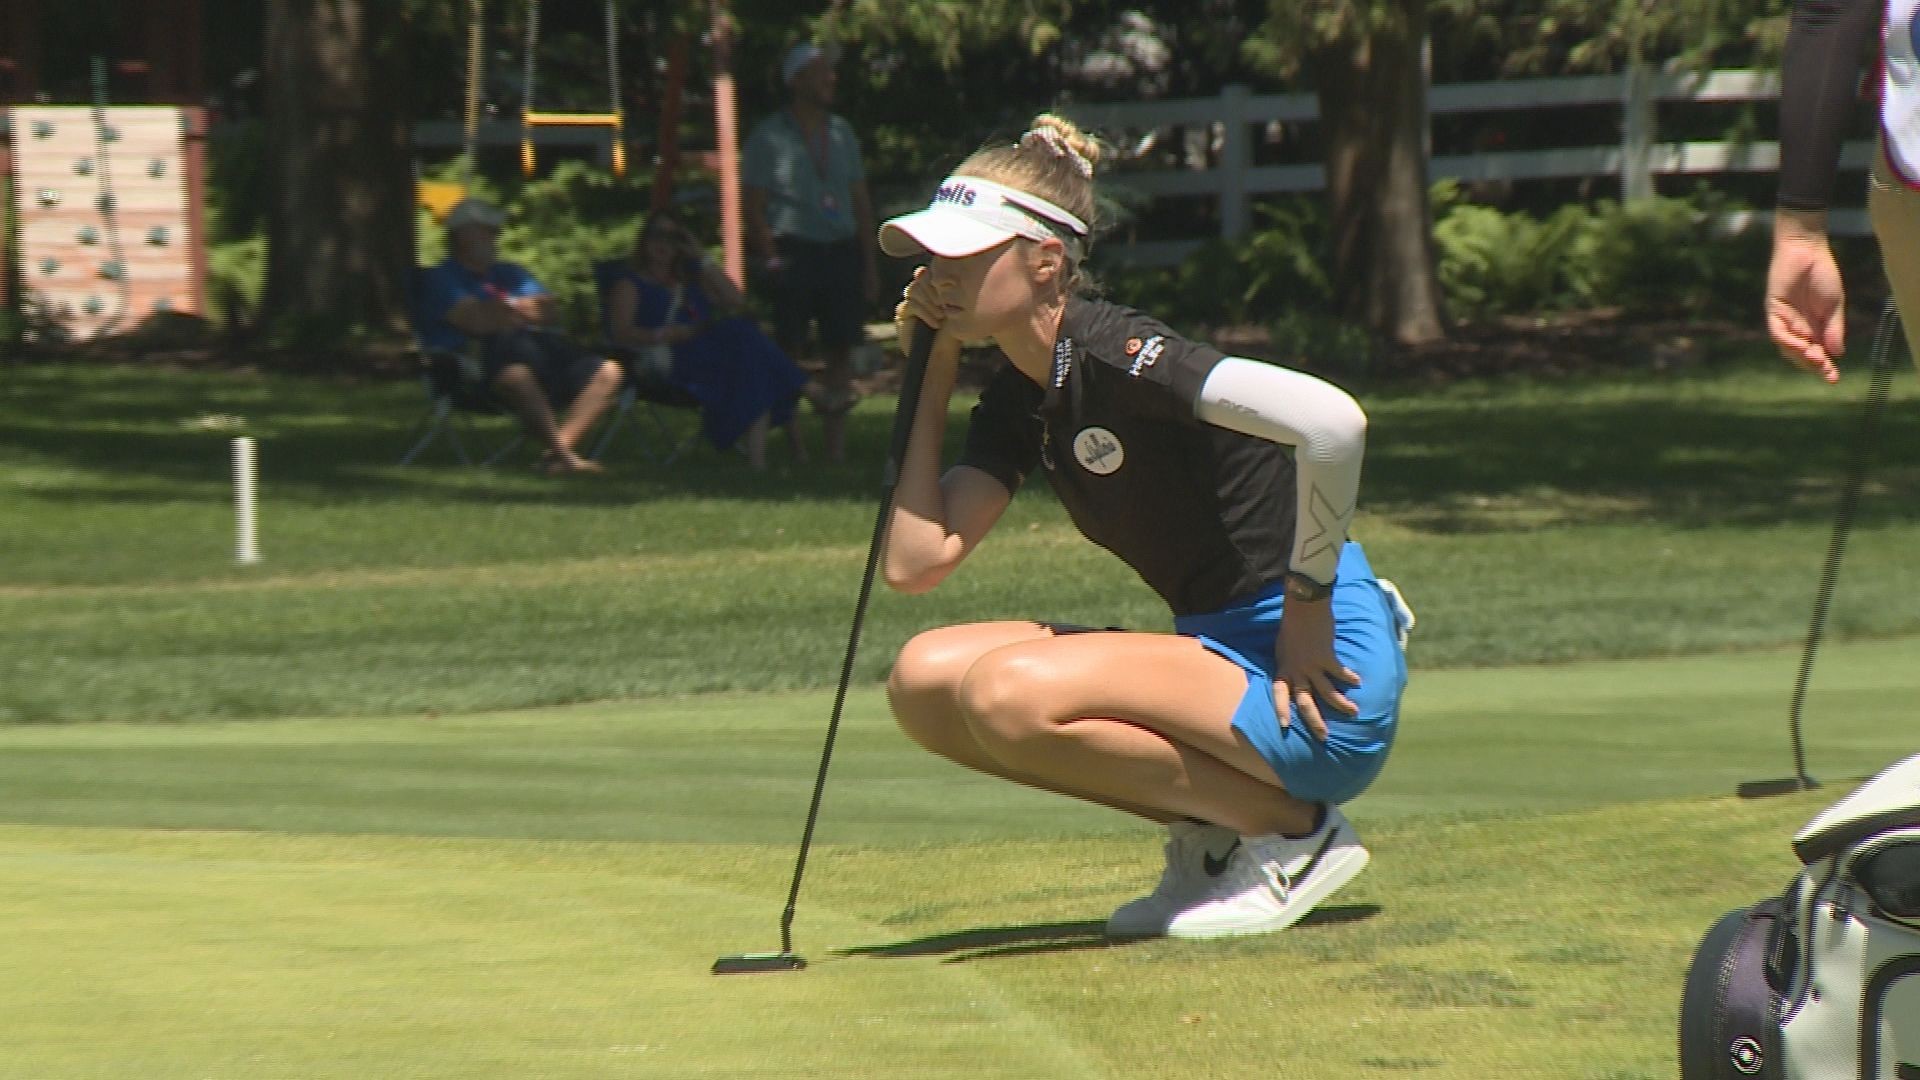 144 of the top female golfers in the world will be participating in a 72-hole stroke play competition at Blythefield Country Club from June 13 through 16.